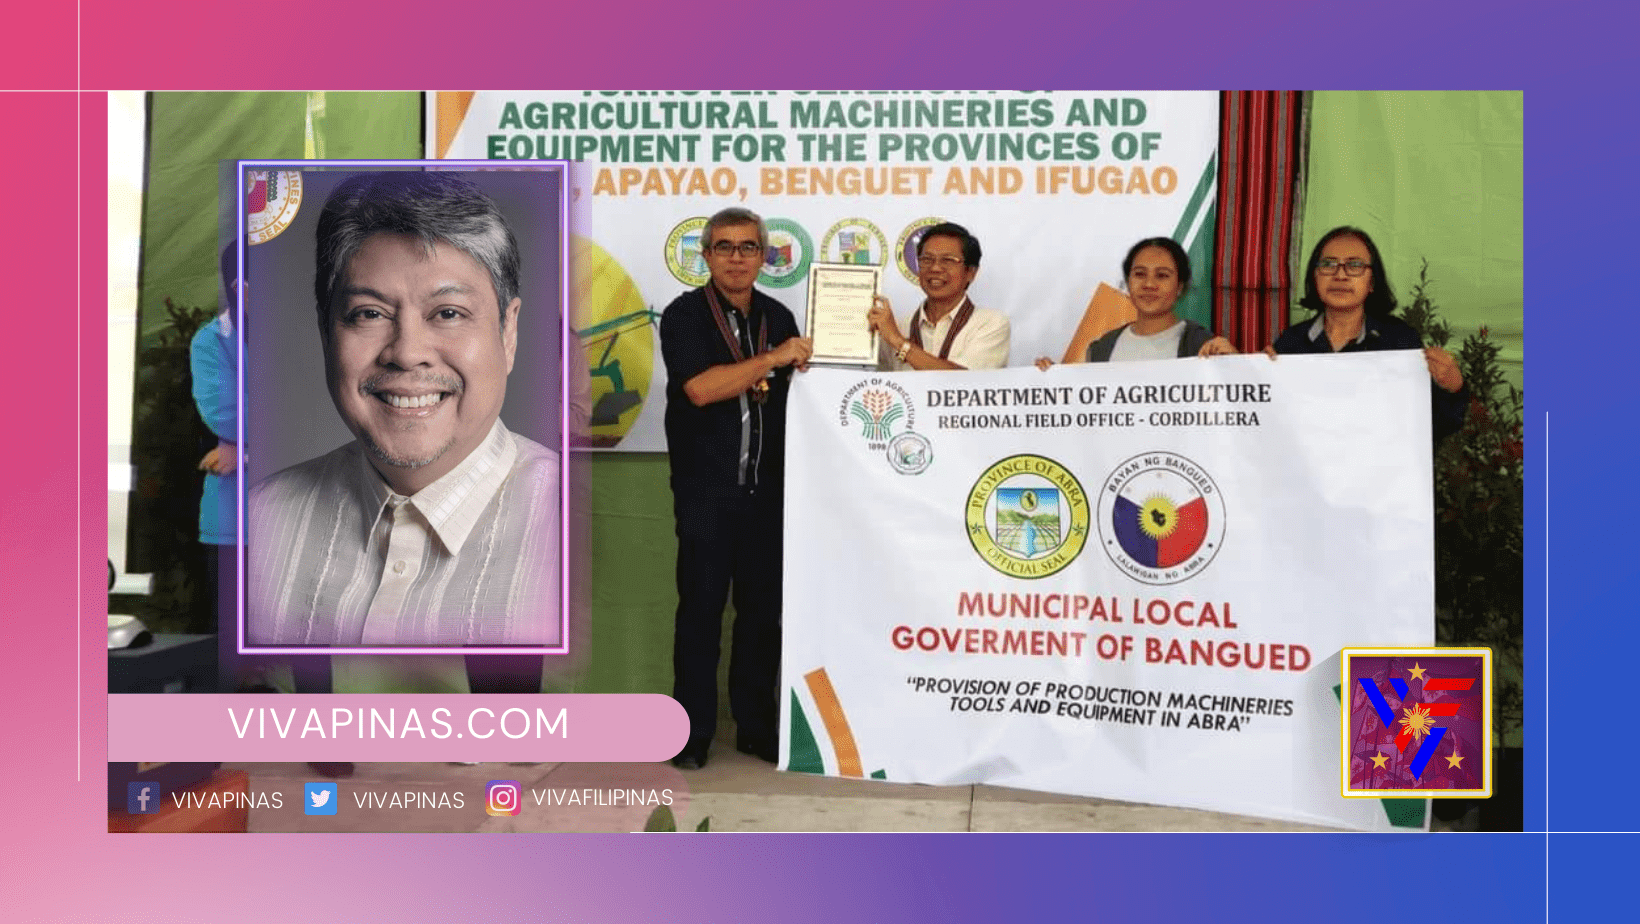 Farmers’ Cooperatives and Associations from the provinces of Abra, Apayao, Benguet, and Ifugao